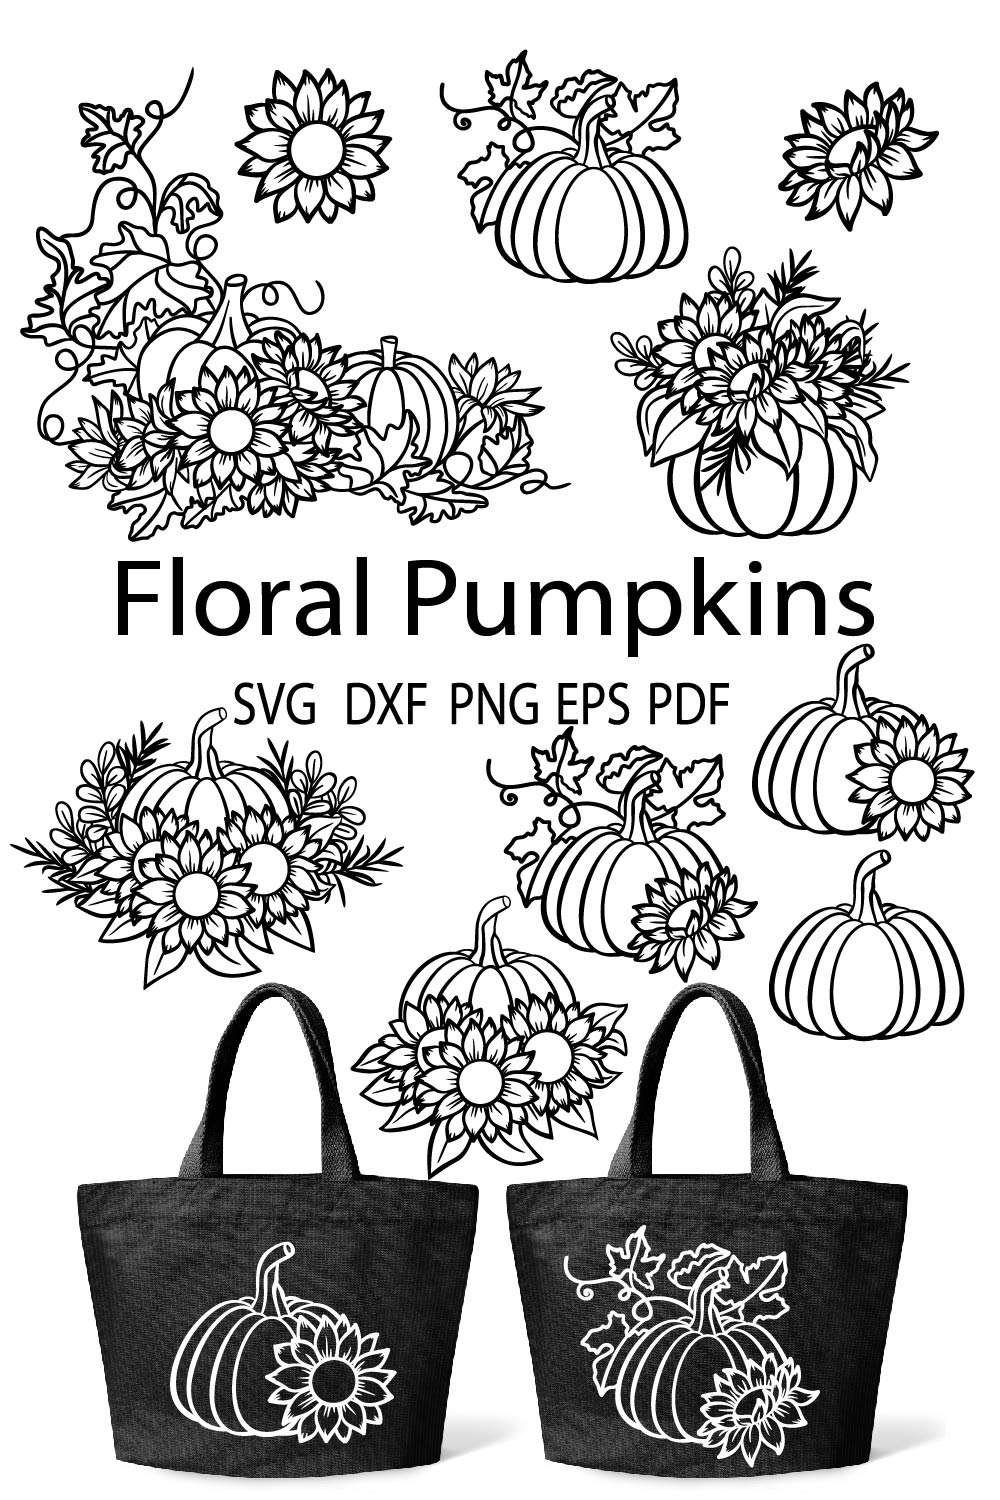 Floral Sunflower And Pumpkin Vector Autumn Illustration For Halloween Or Thanksgiving Pinterest Image.